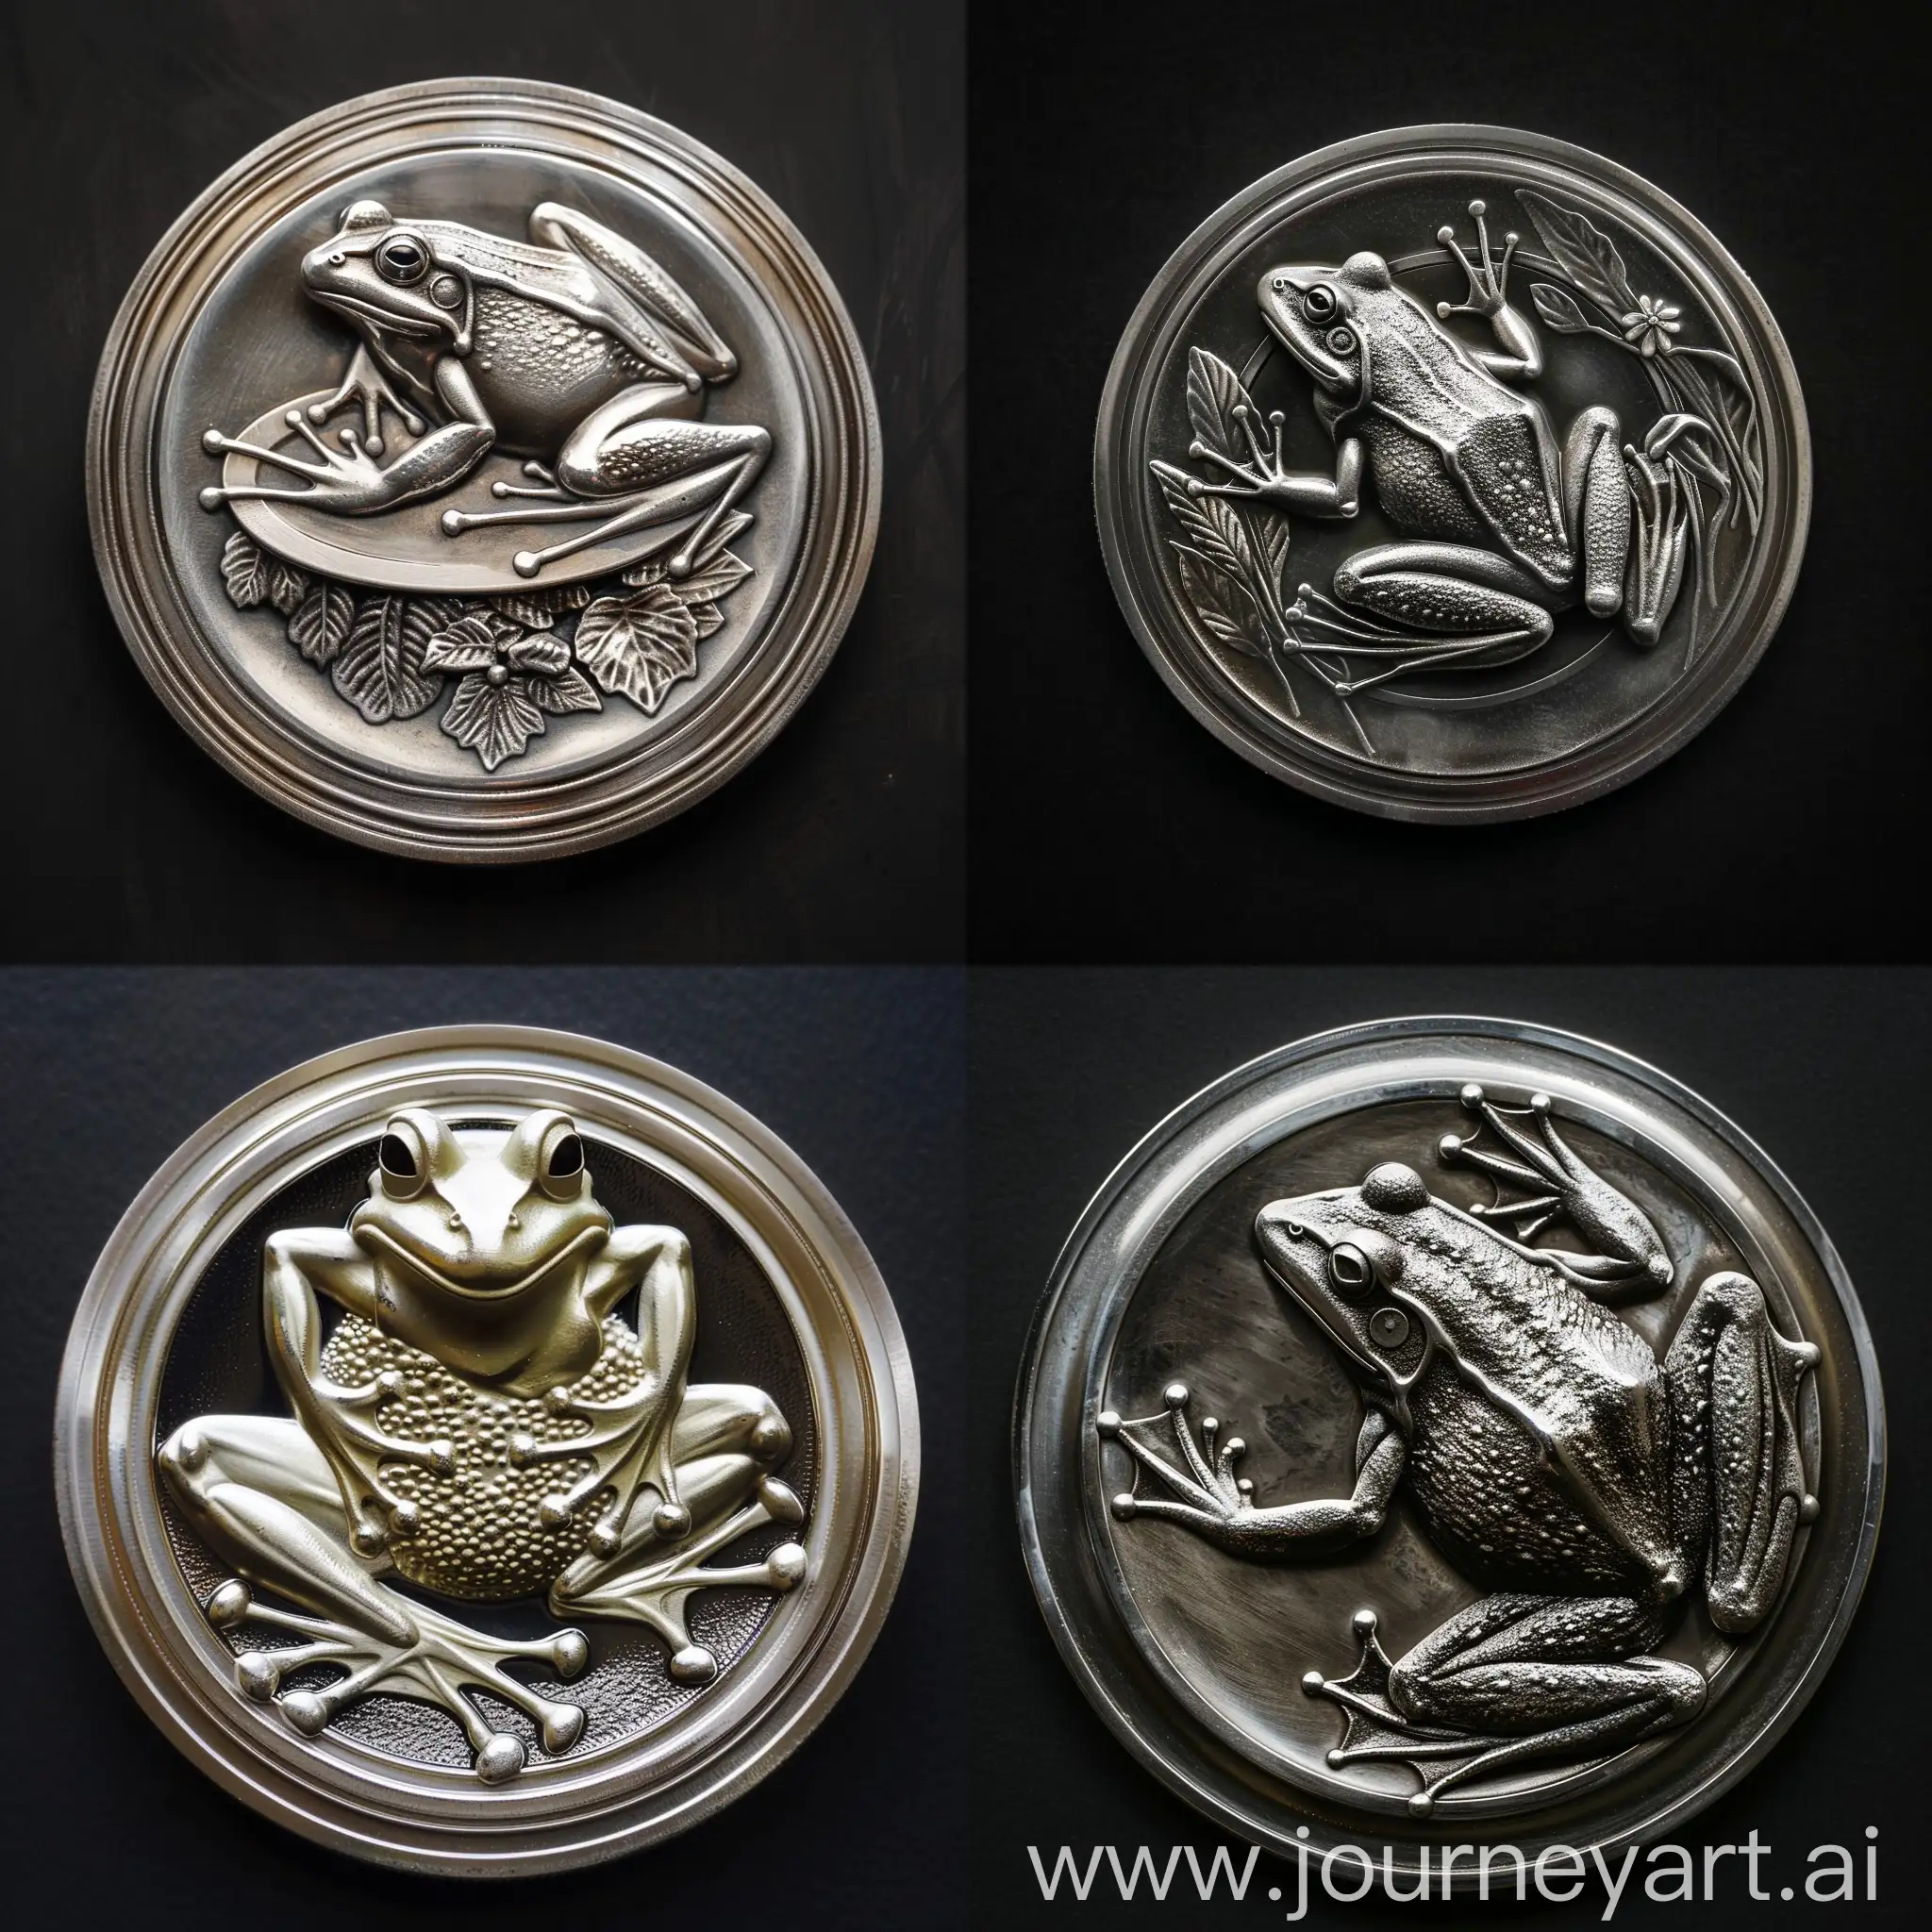 Silver-Frog-Coin-Effigy-on-Dinner-Plate-with-Black-Background